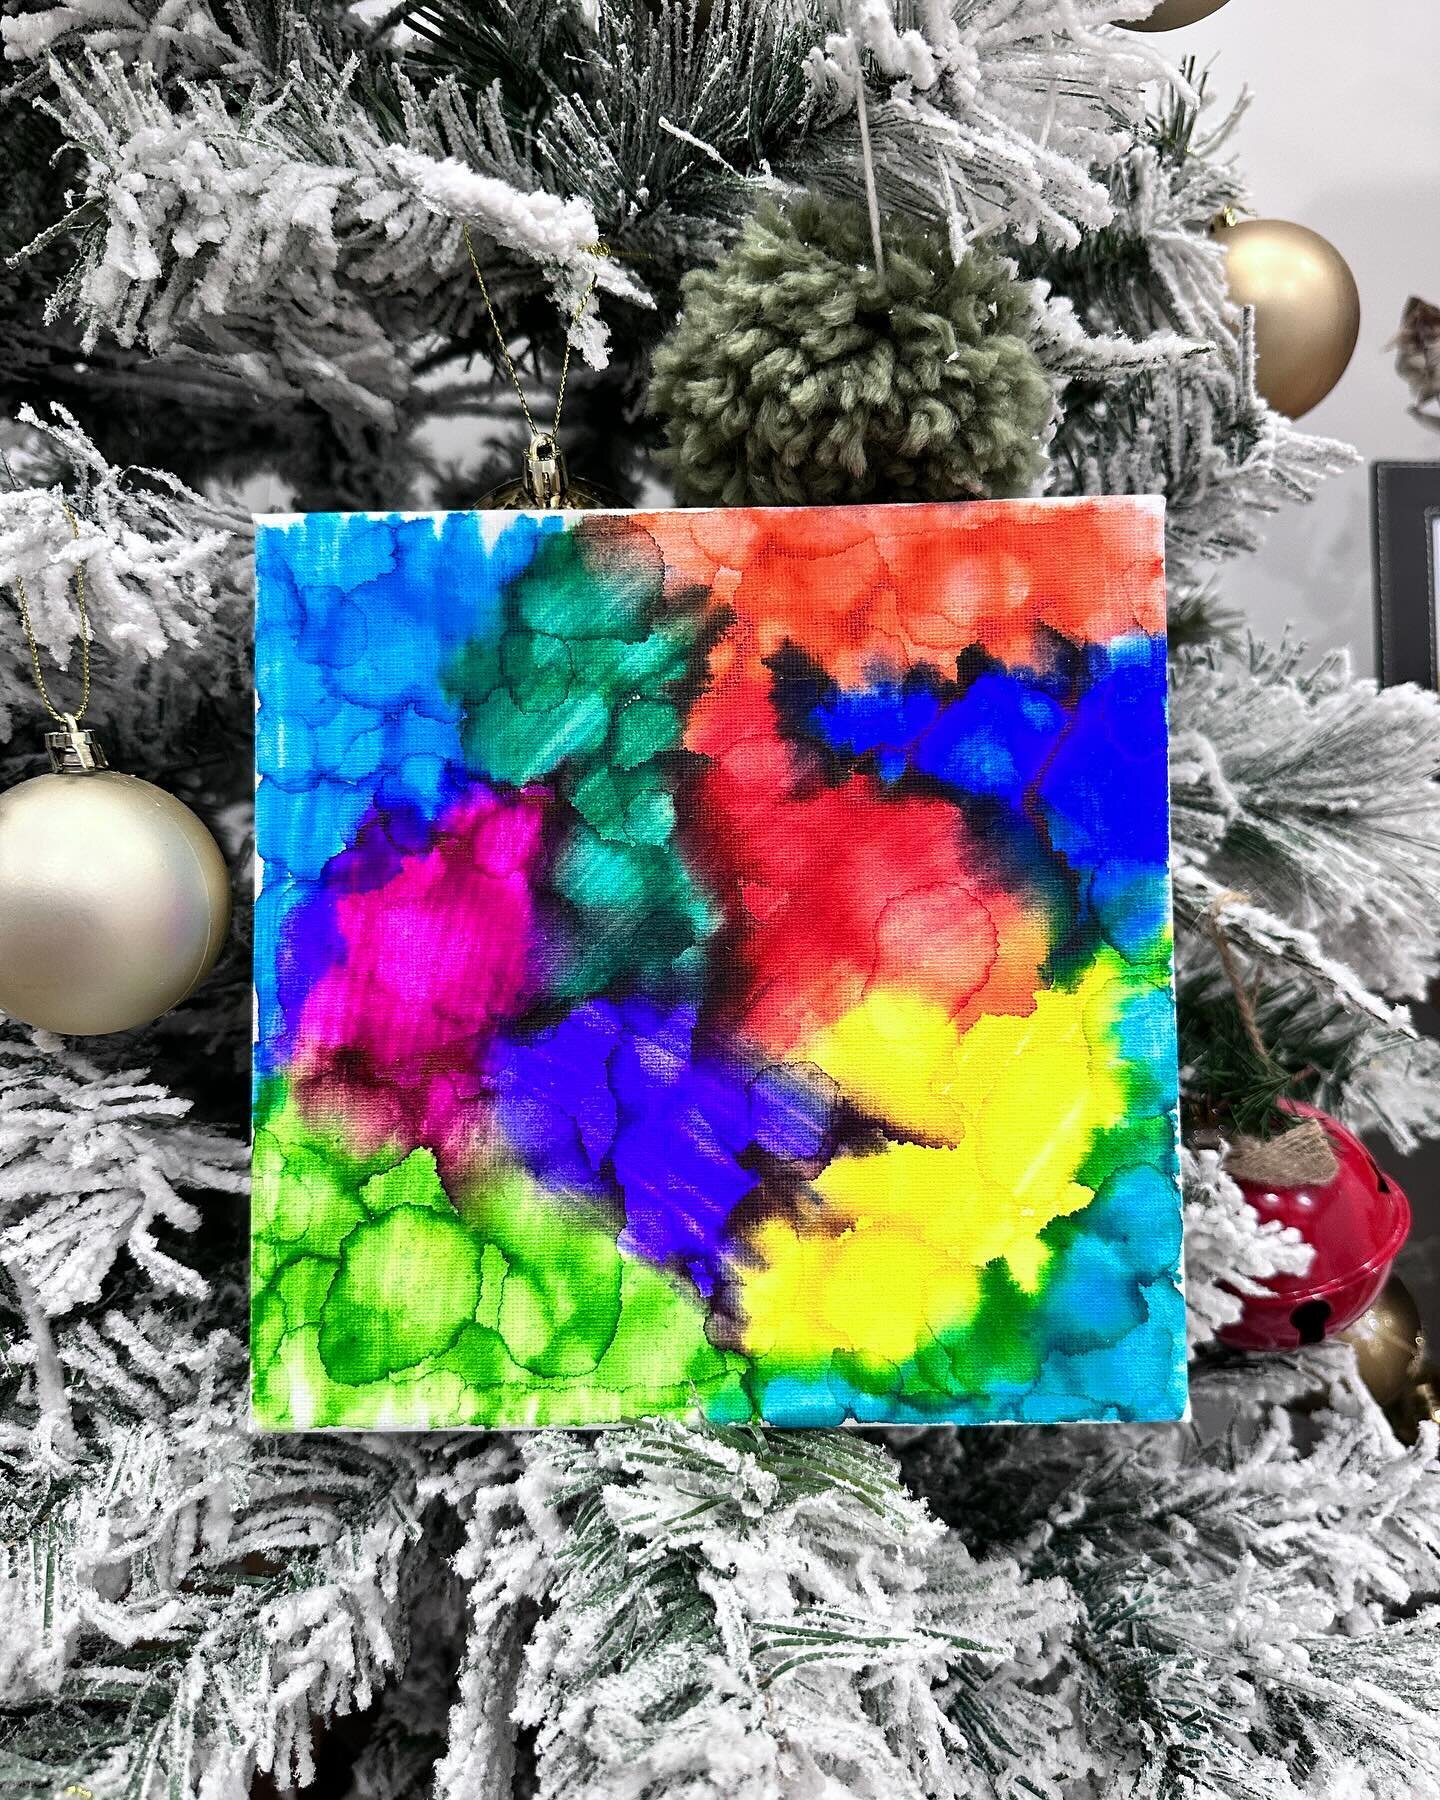 Write a caption... The alcohol ink adventure is truly an exploration into contemporary artistry. Often reserved for adults, this form of art involves using chemicals in a safe and guided manner. By introducing this to kids, I aim to provide an early 